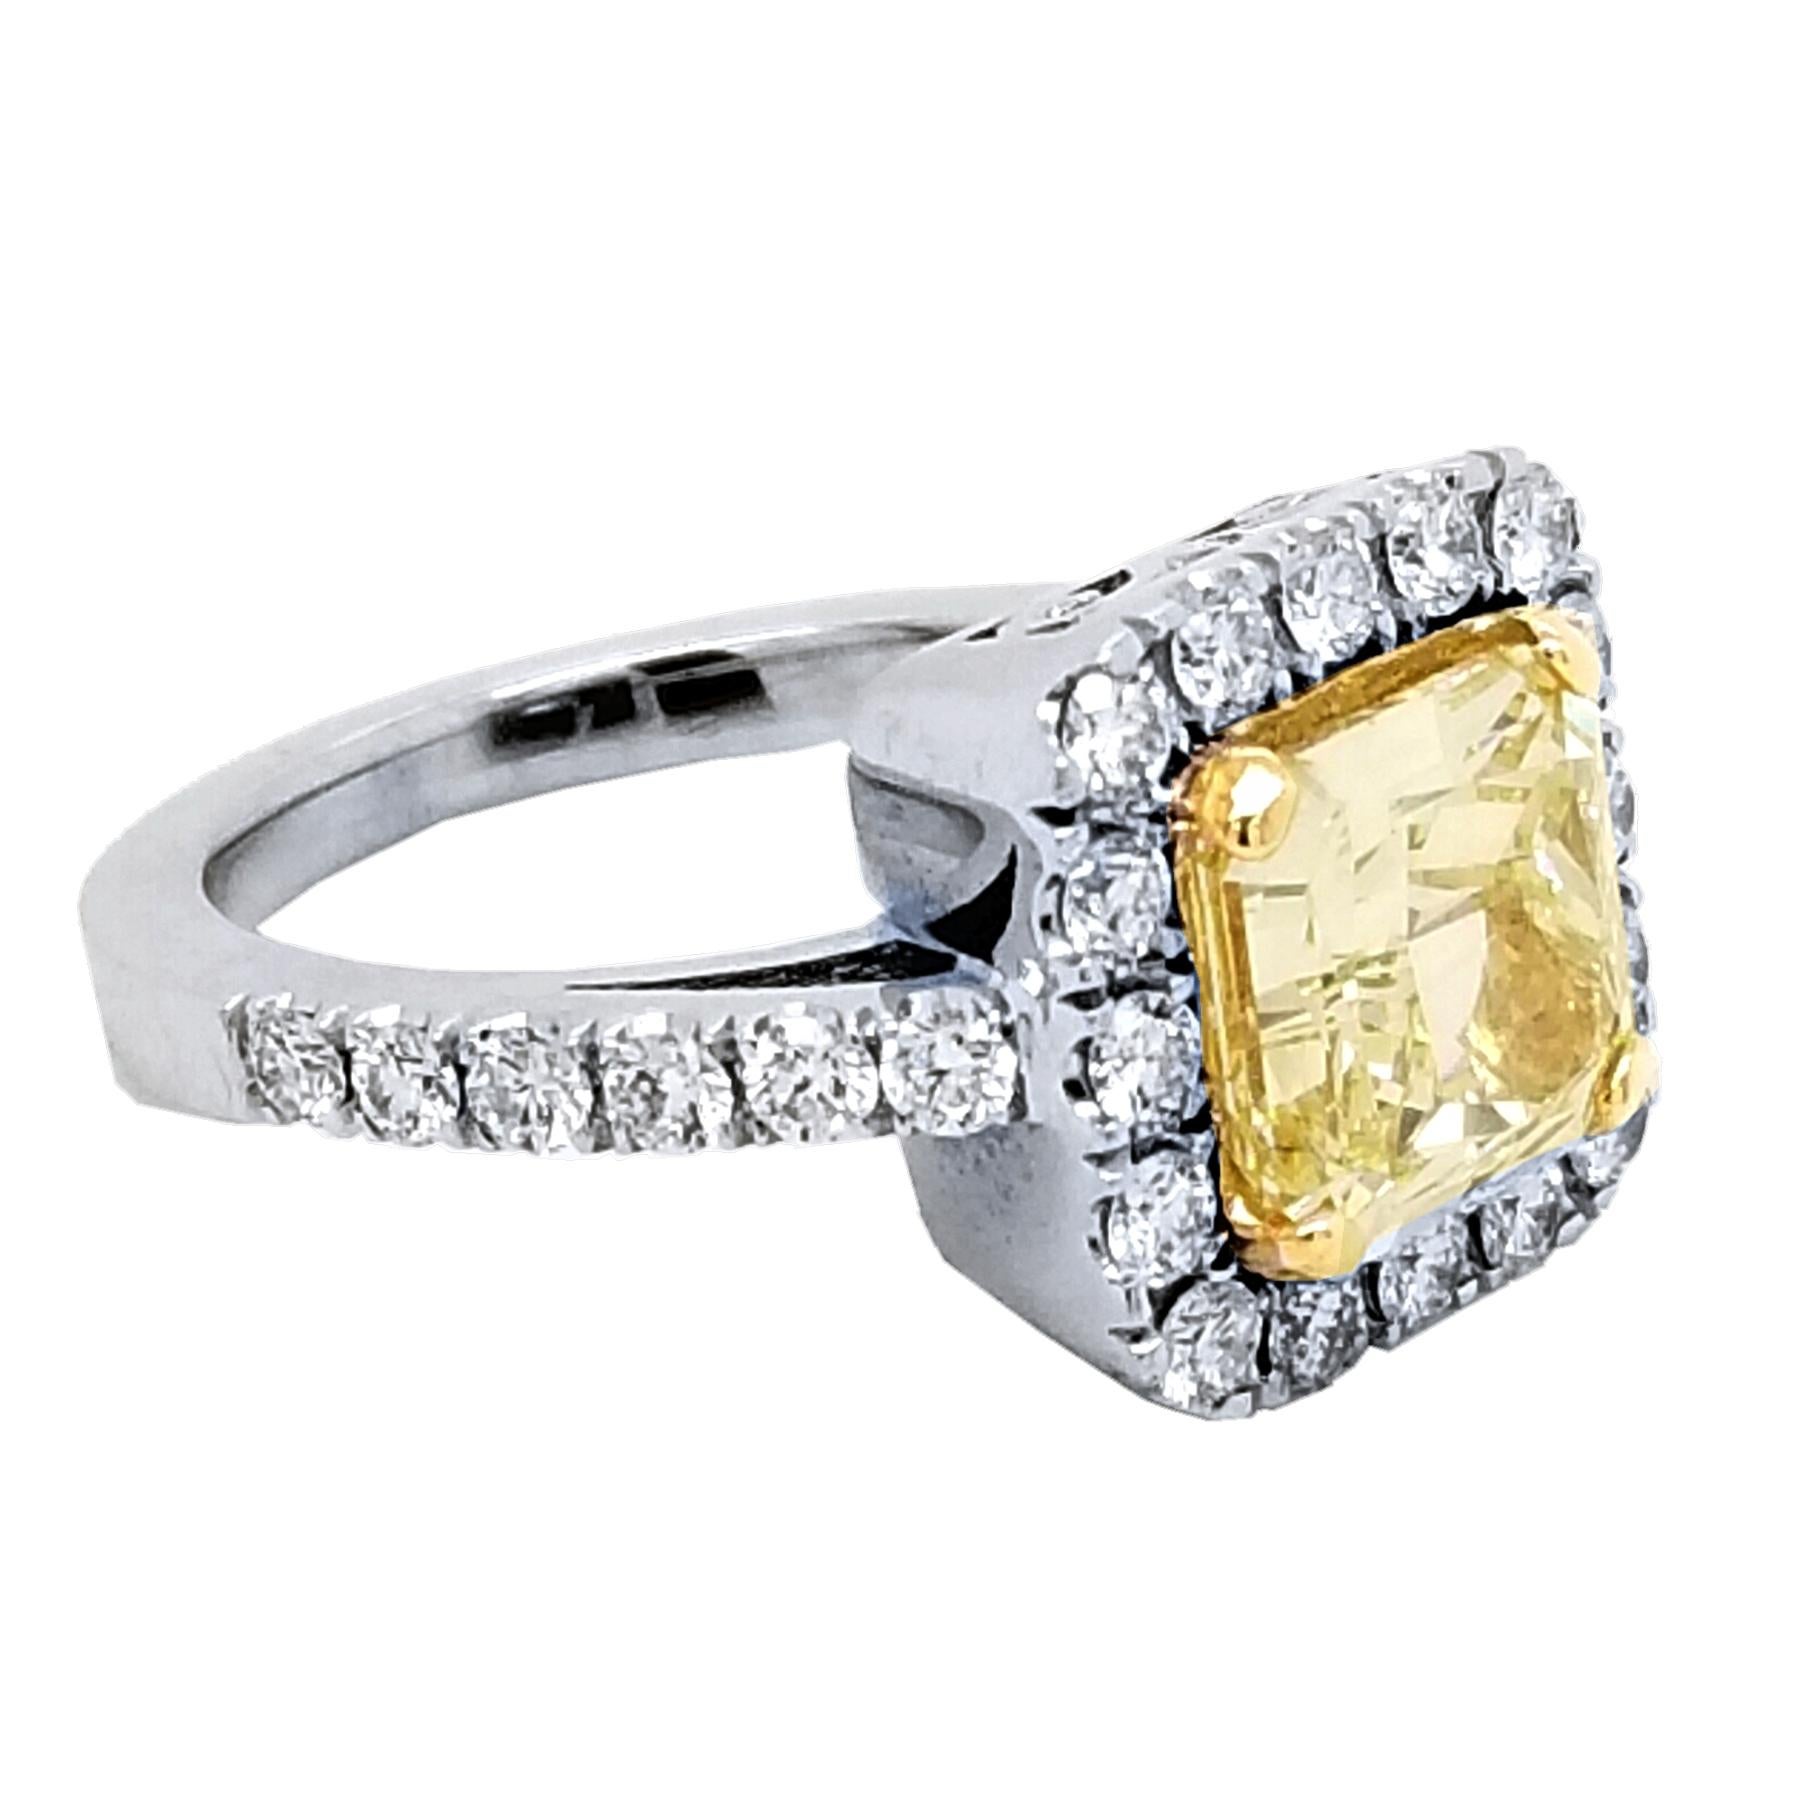 A Square Radiant Cut Natural Fancy Light Yellow VS2 EGL US certified center Diamond set in a beautiful 18k gold pave set Diamond Engagement Ring with Halo with total weight of 0.91 Ct. diamonds on the side #sayitwithyellow 

Center stone: 2.49 Ct